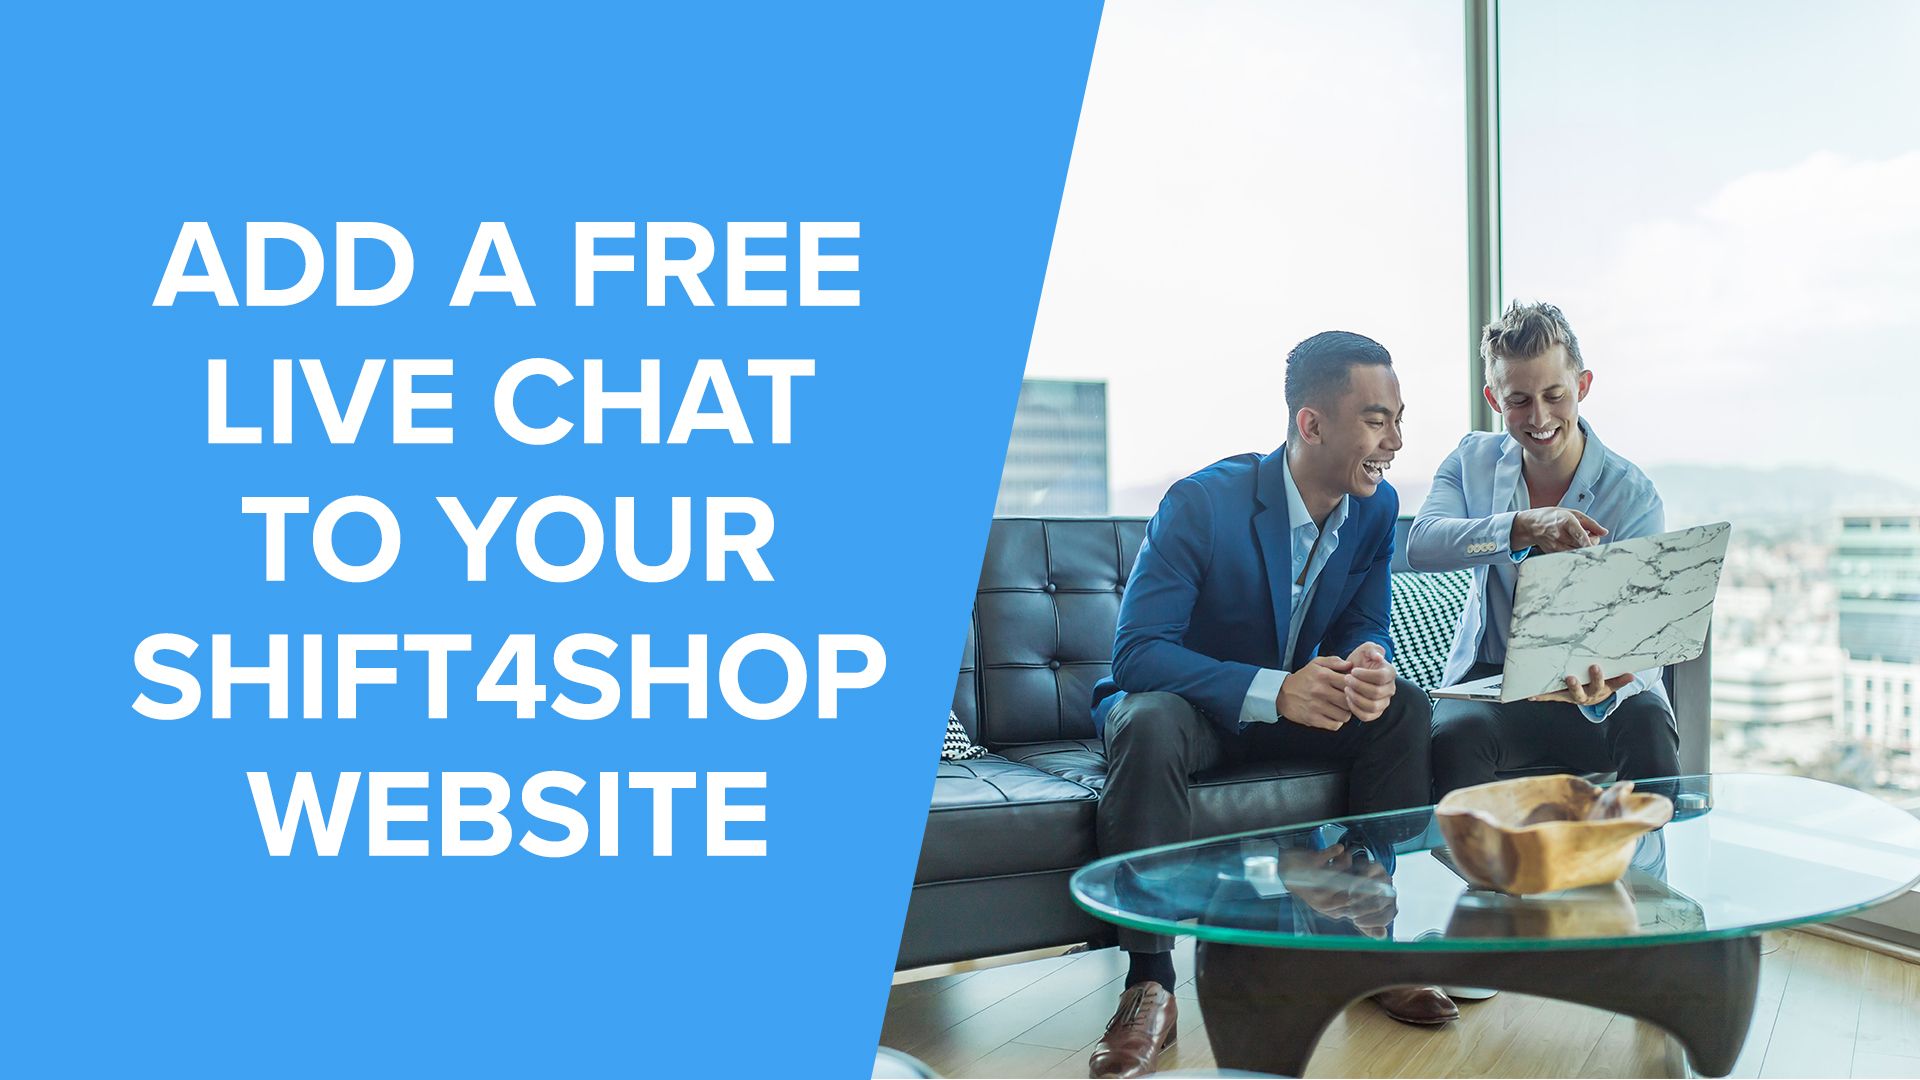 Add a live chat to your Shift4Shop website